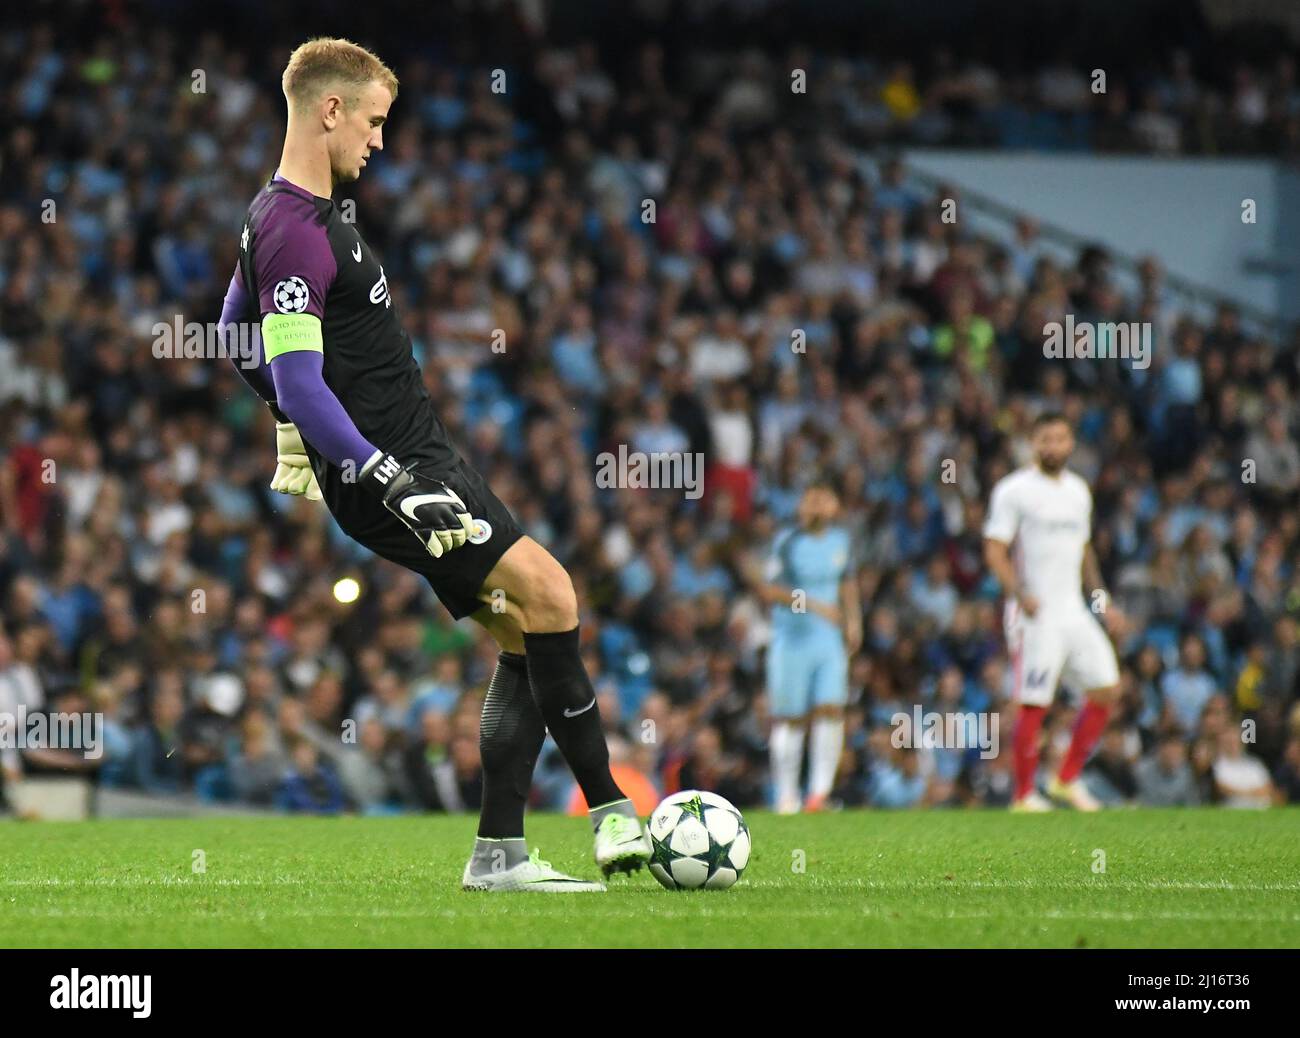 MANCHESTER, ENGLAND - AUGUST 24, 2016: Joe Hart of City pictured during the second leg of the 2016/17 UEFA Champions League tie between Manchester City (Engalnd) and FCSB (Romania) at Etihad Stadium. Copyright: Cosmin Iftode/Picstaff Stock Photo